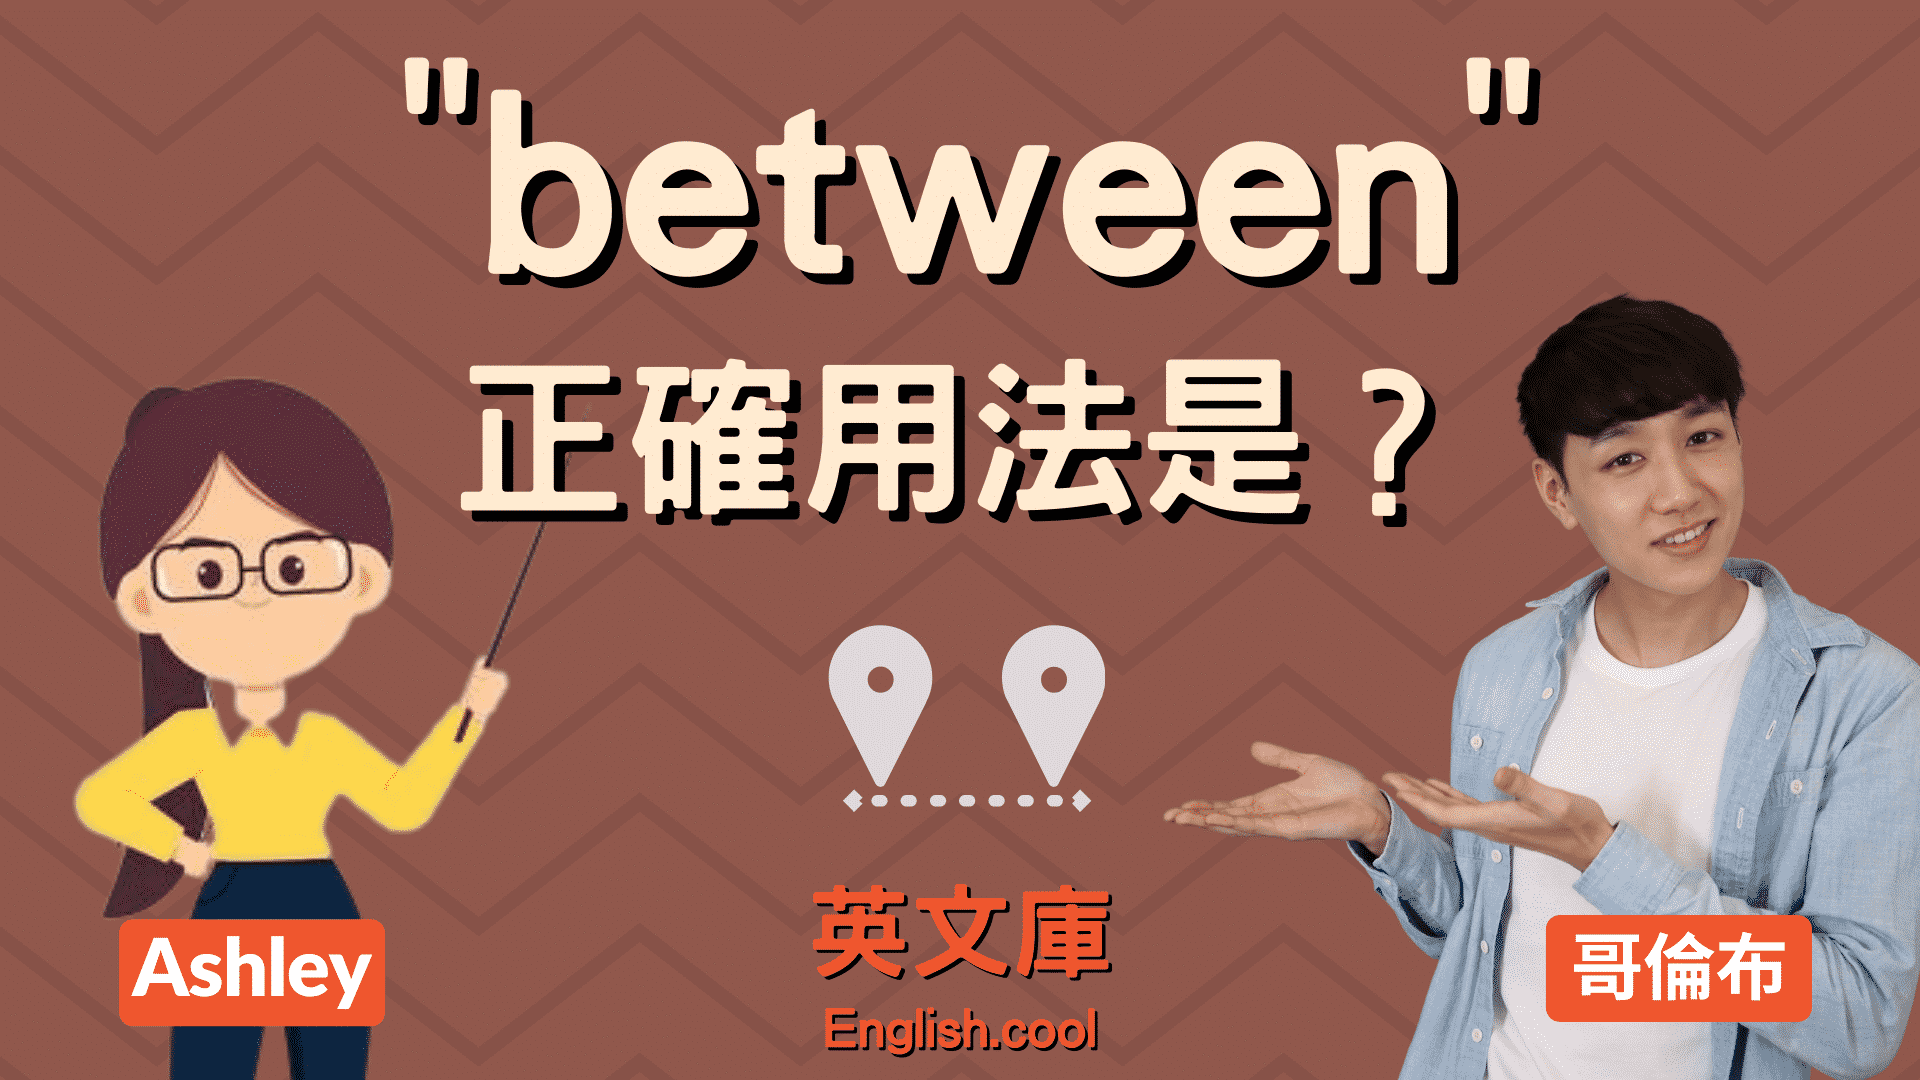 You are currently viewing 「between」正確用法是？來看例句搞懂！